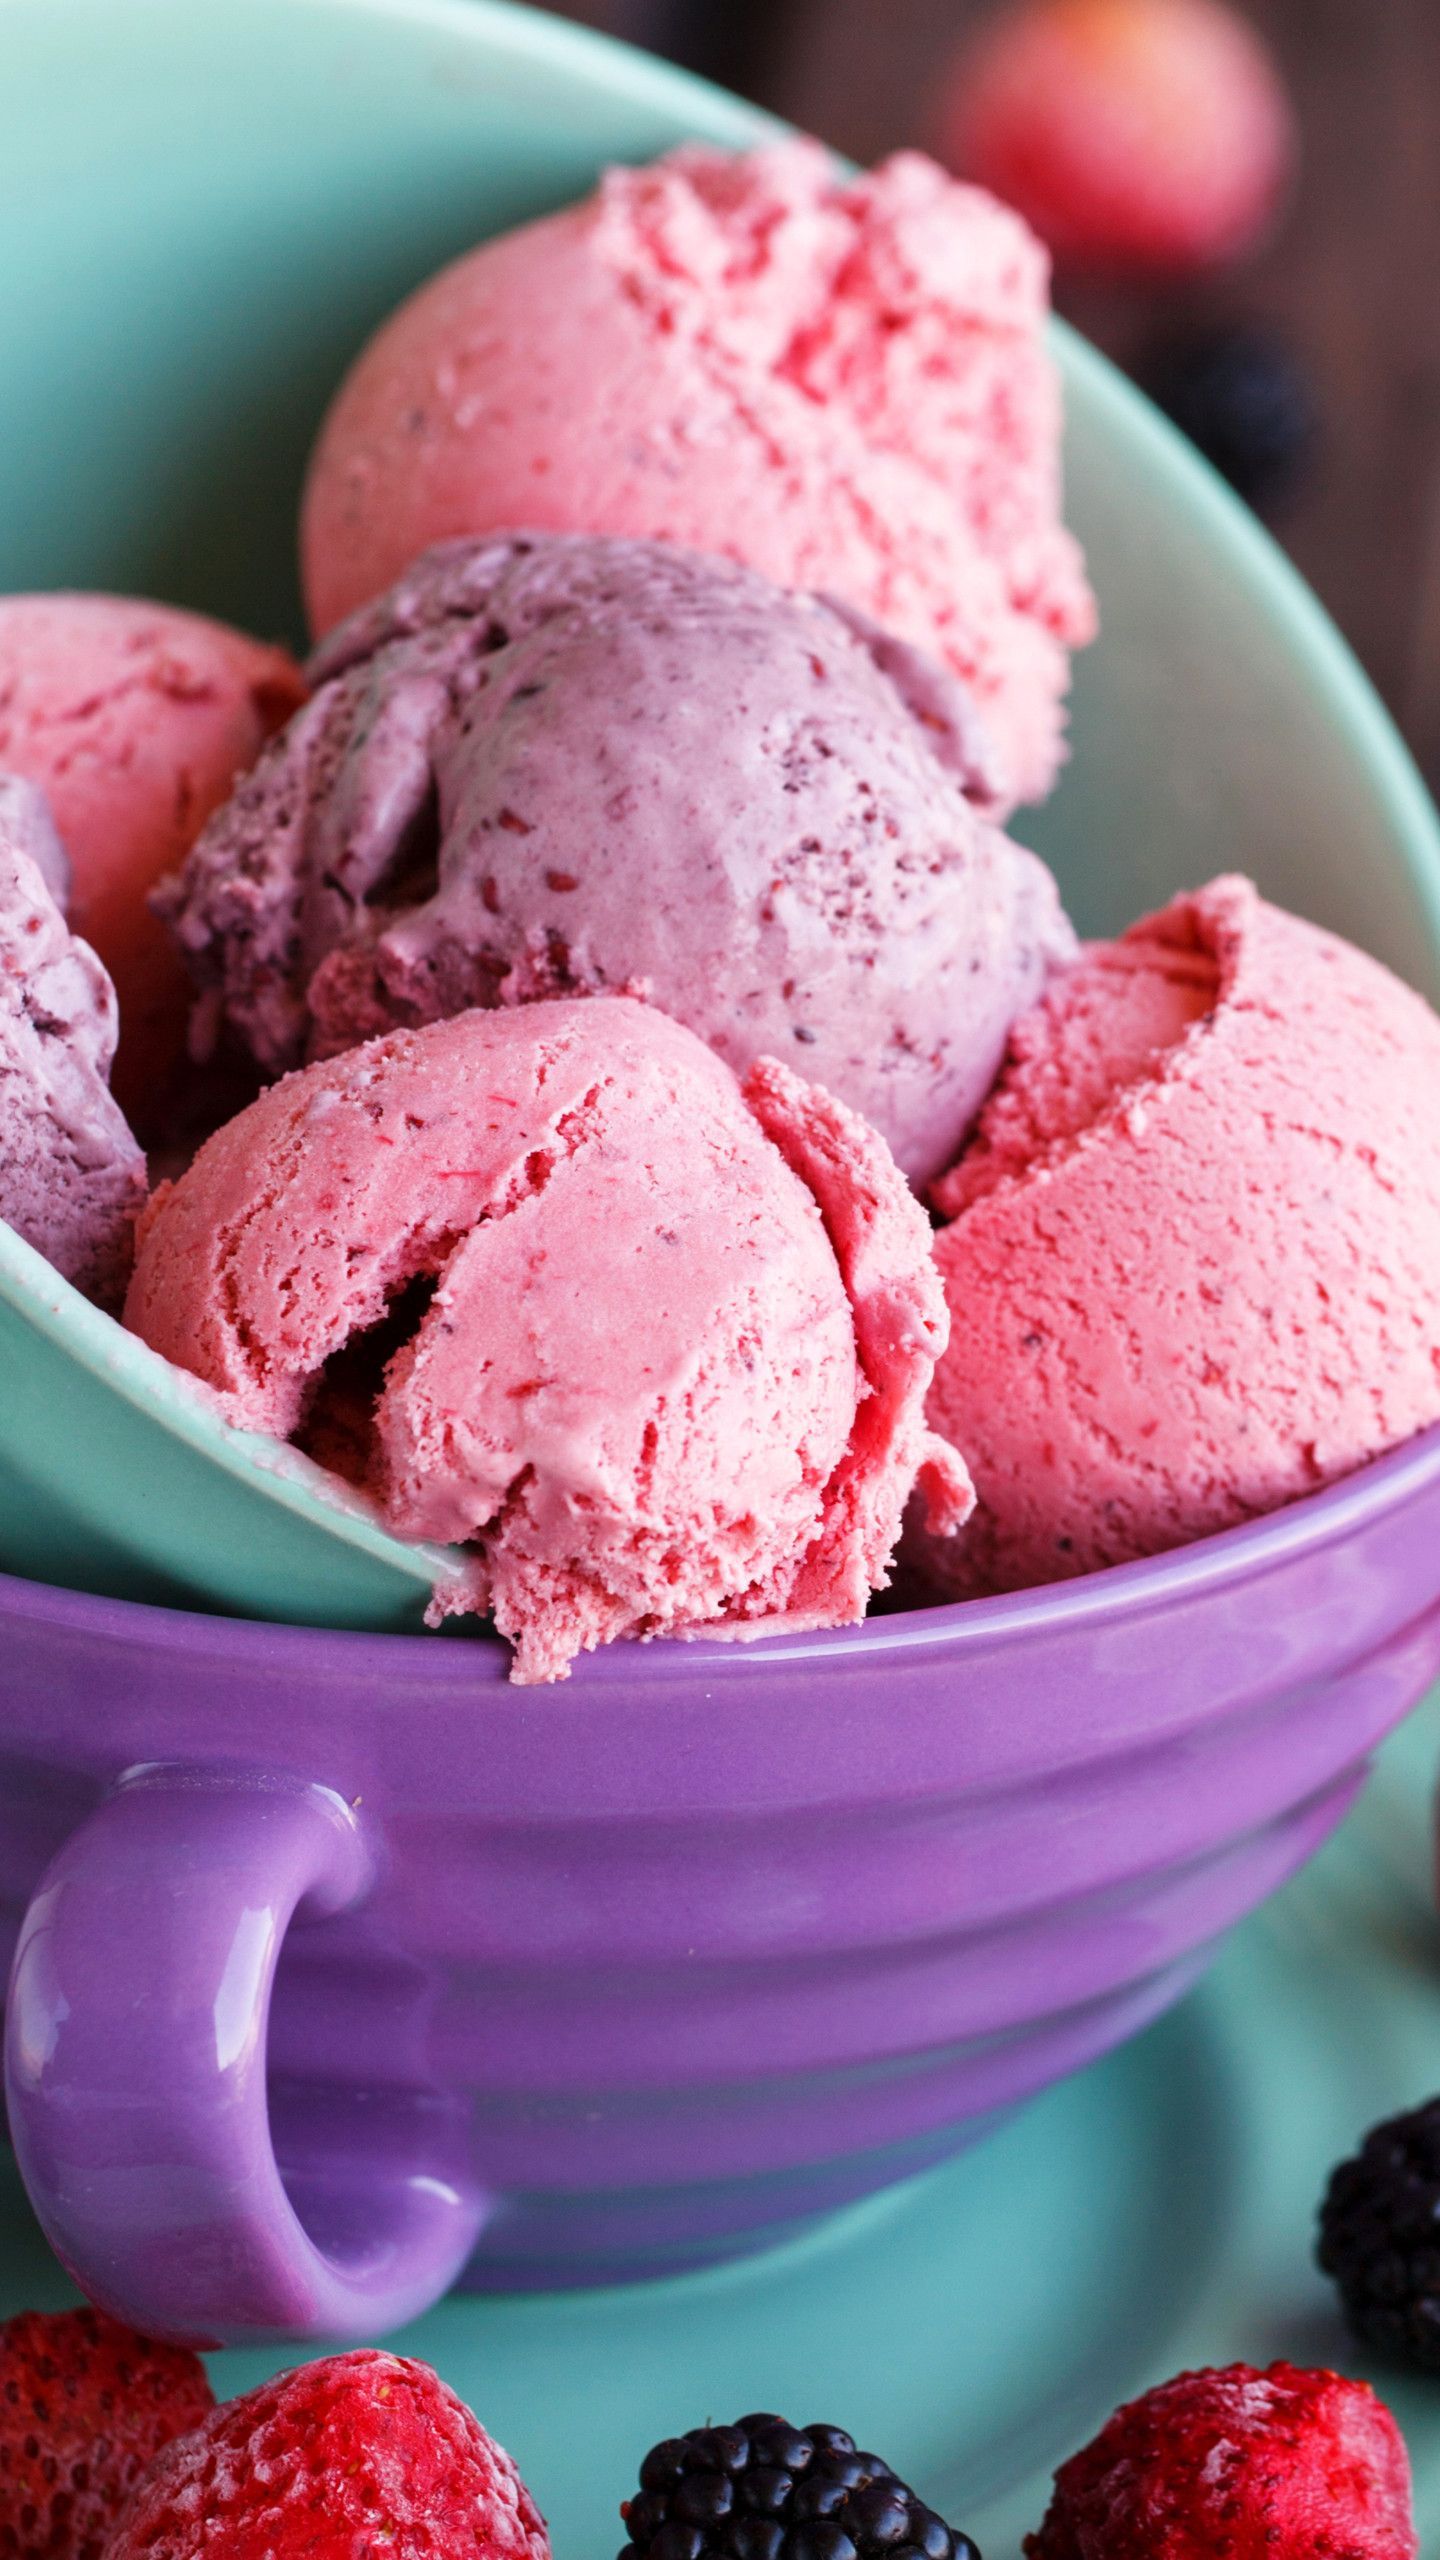 A purple bowl full of scoops of mixed berry ice cream. - Ice cream